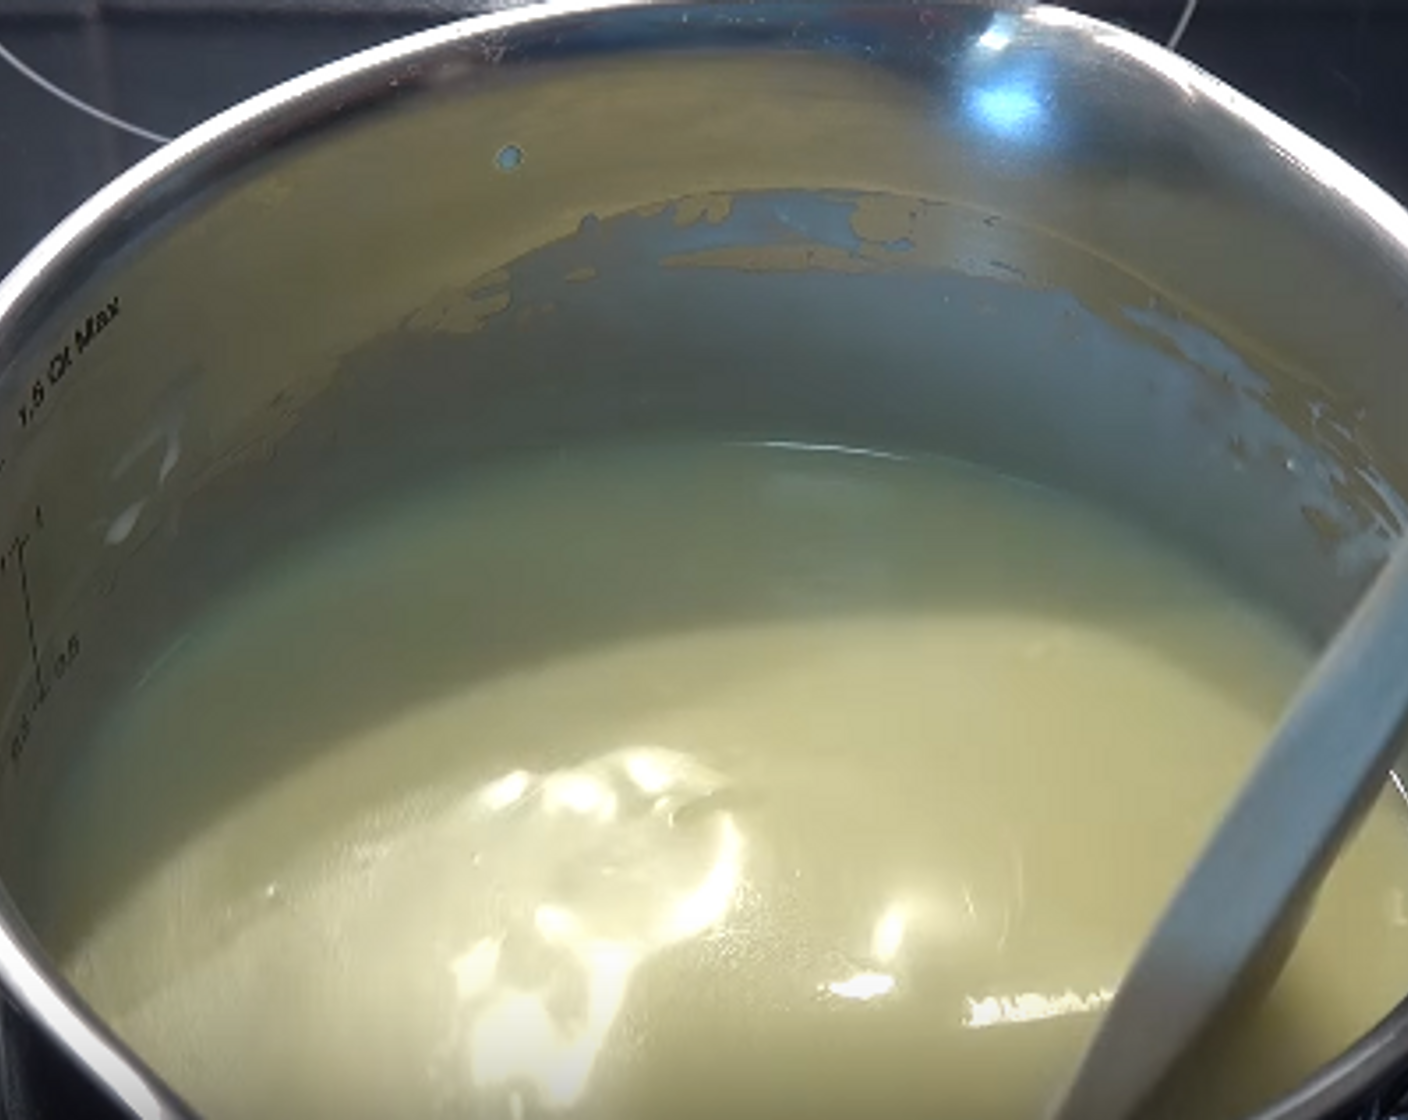 step 1 In a saucepan, add Whipping Cream (1/2 cup) and White Chocolate (2/3 cup). Gently stir over a low heat until completely mixed together. Set aside for 5 minutes to cool.